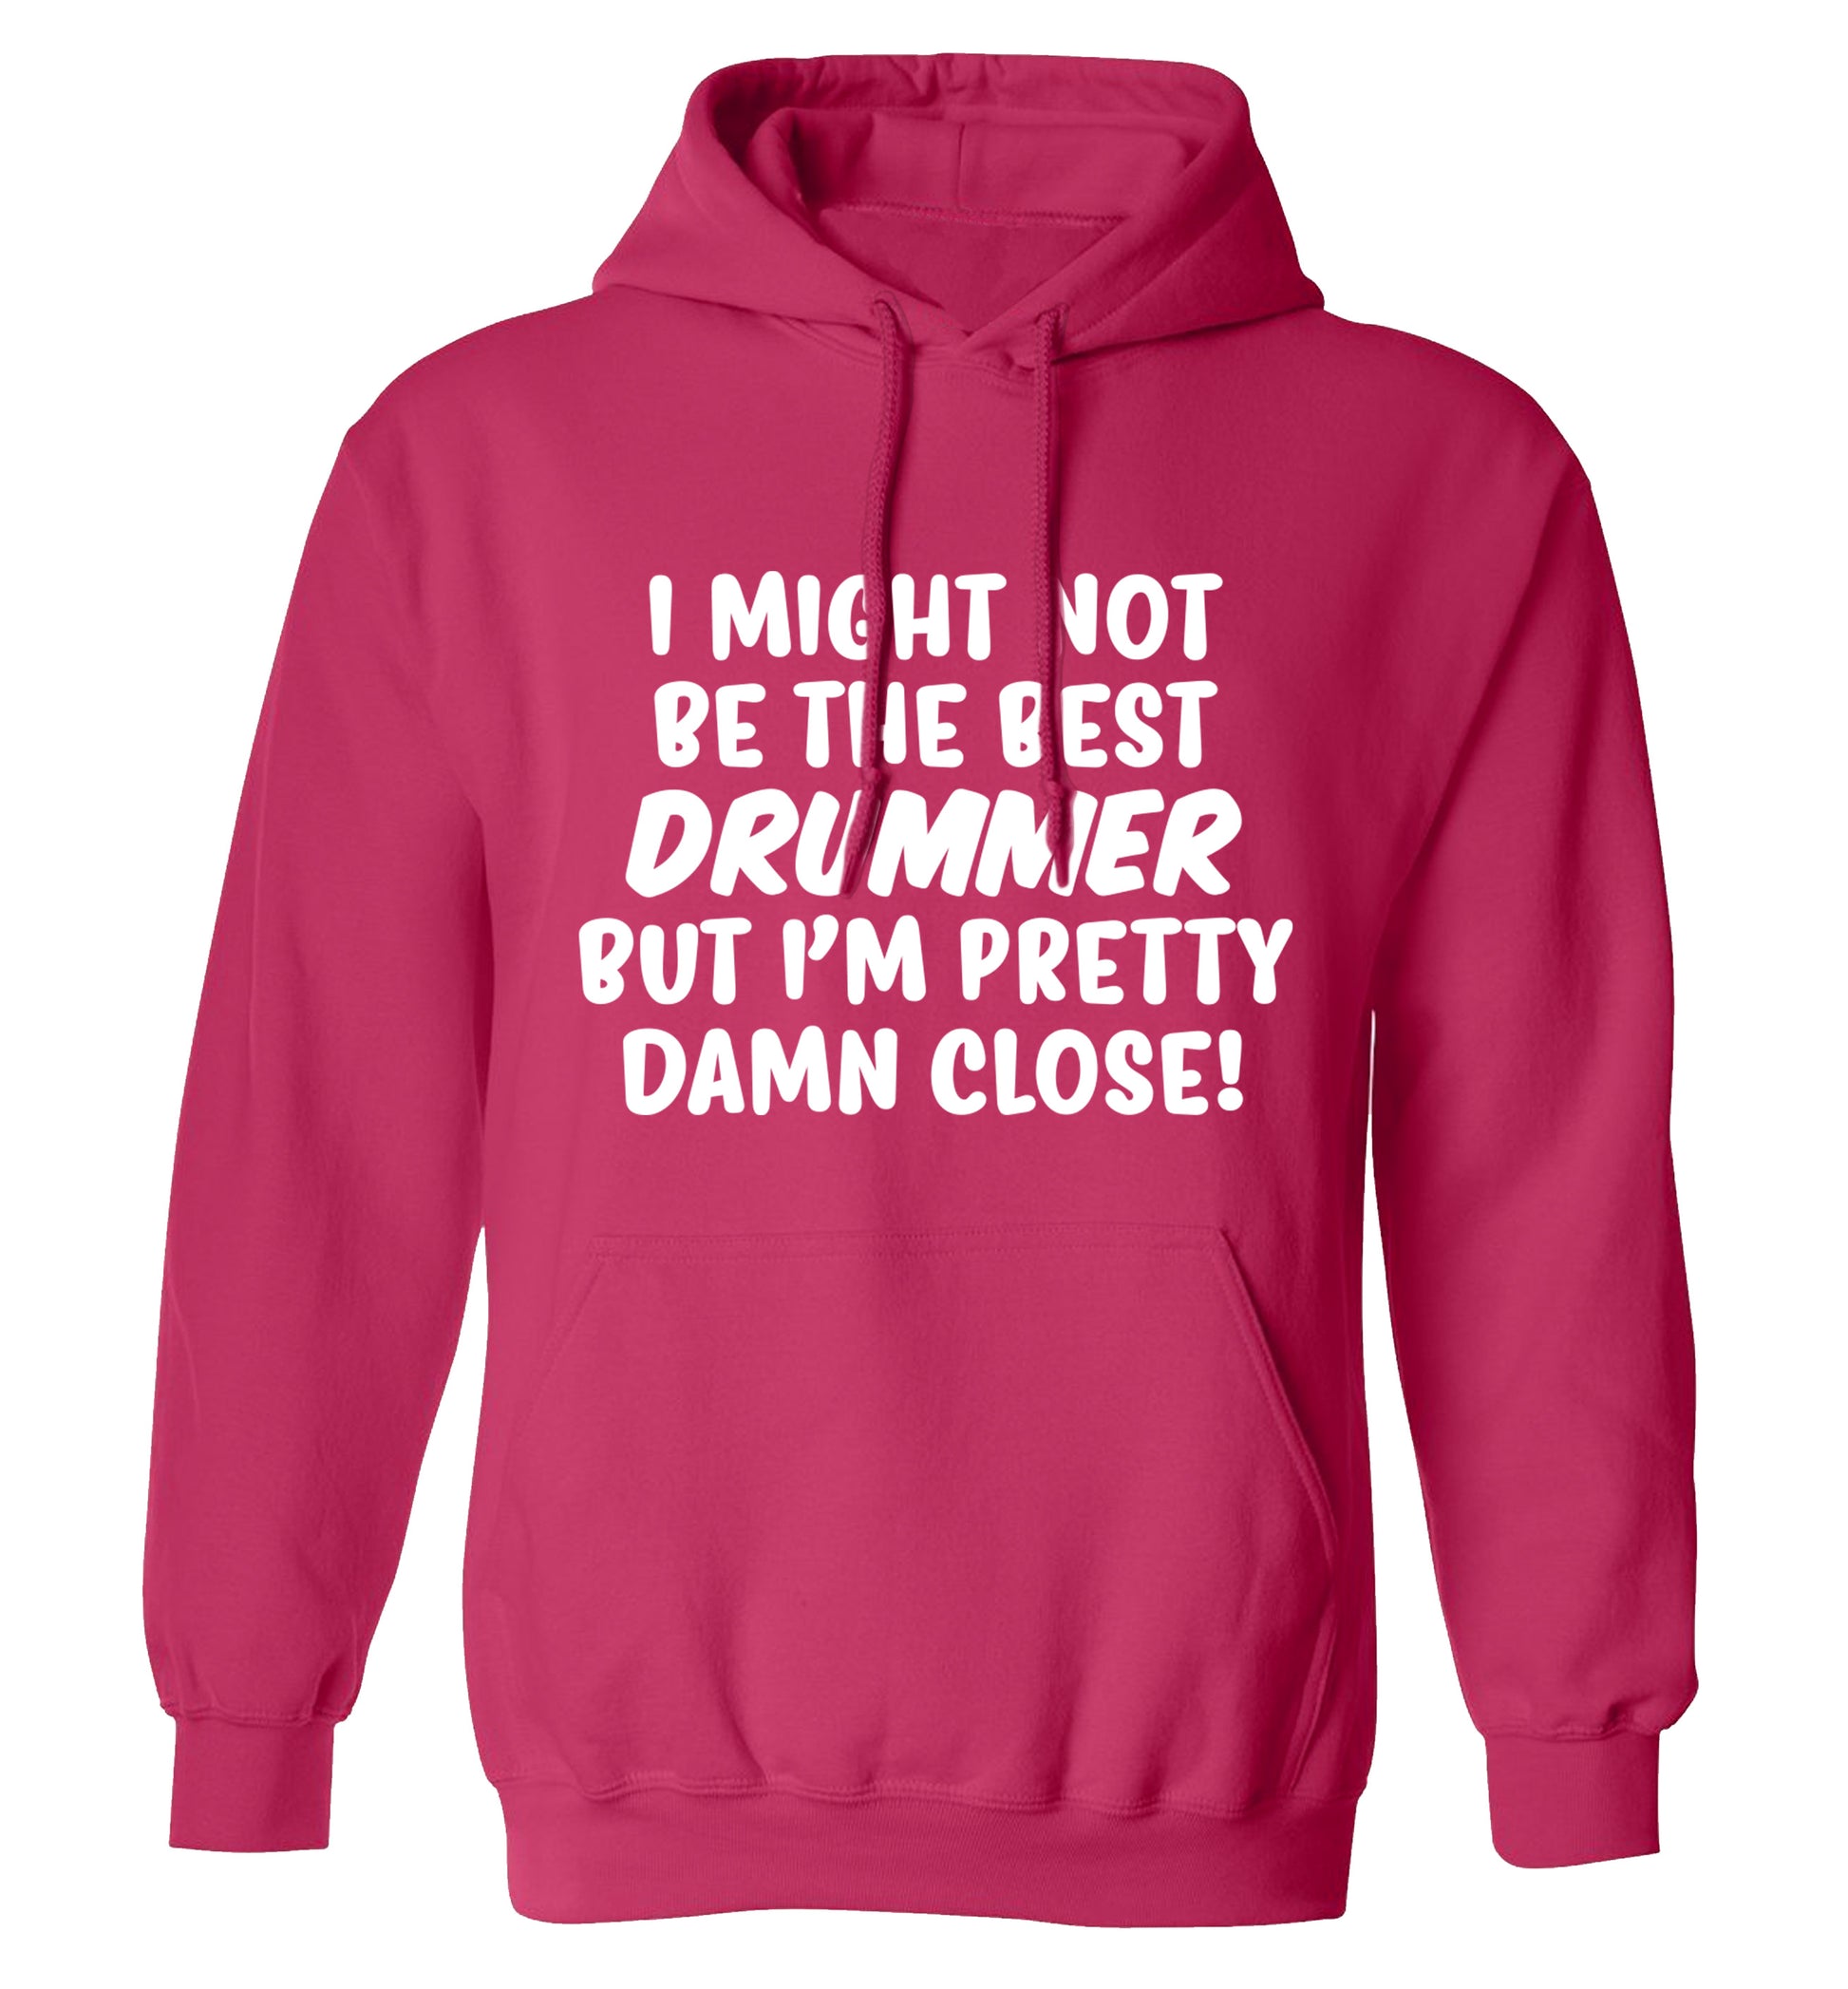 I might not be the best drummer but I'm pretty close! adults unisexpink hoodie 2XL